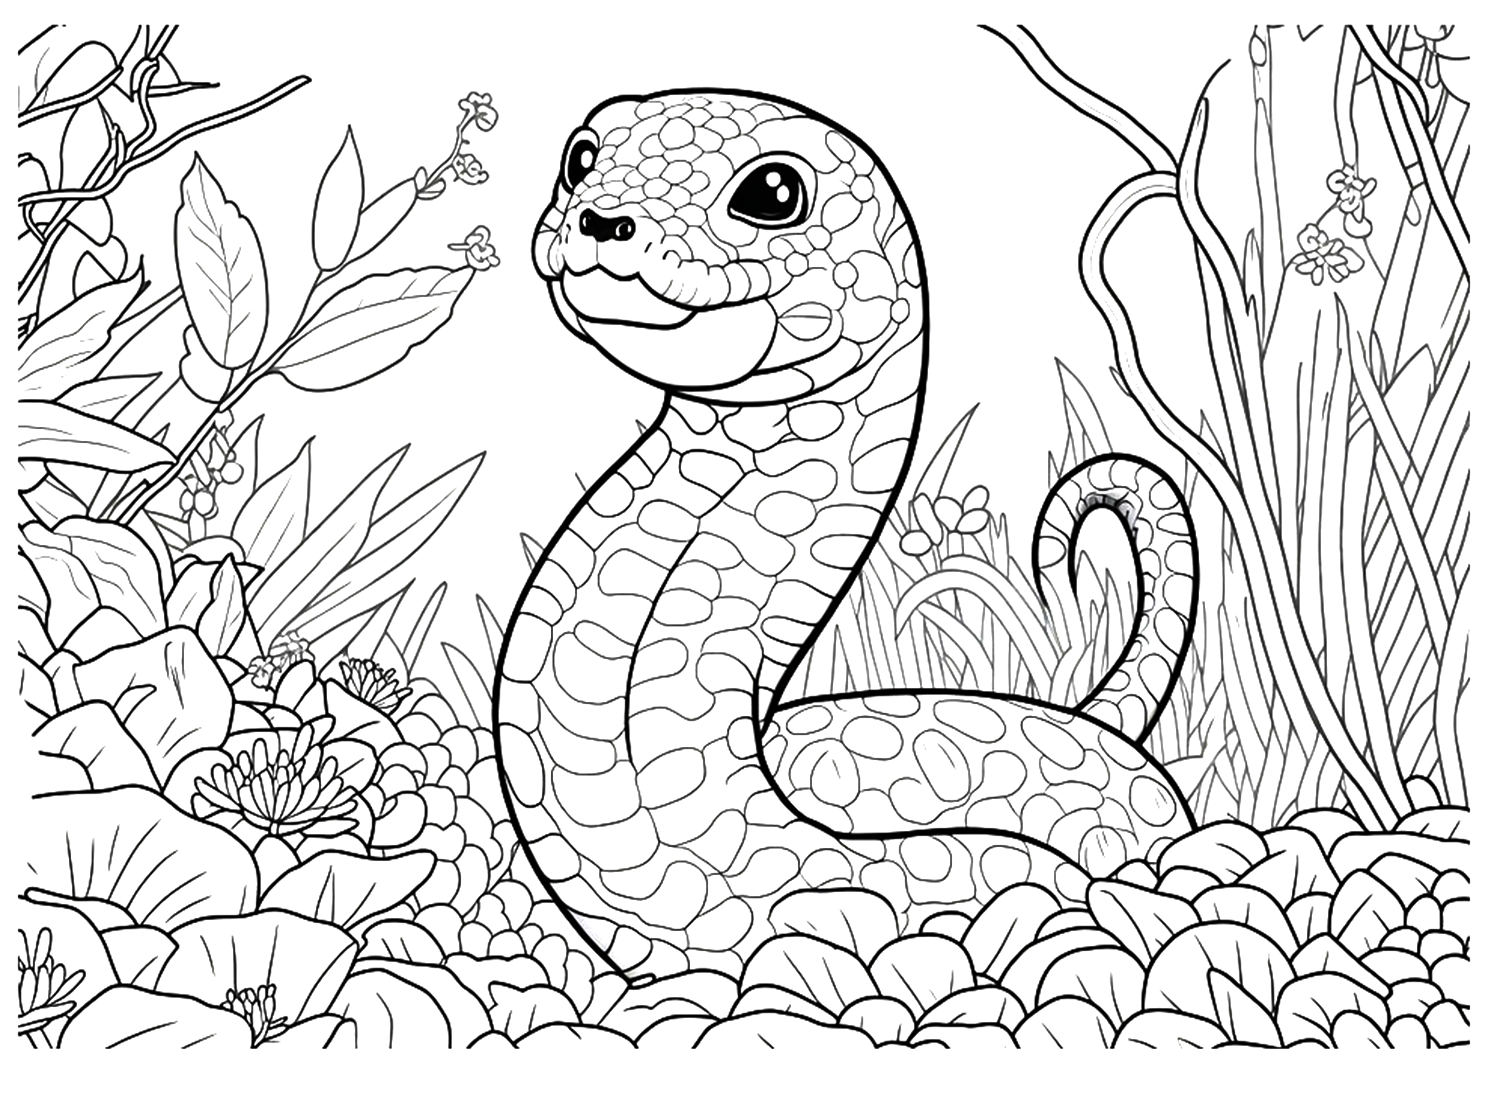 Cute Python Coloring Sheet from Python